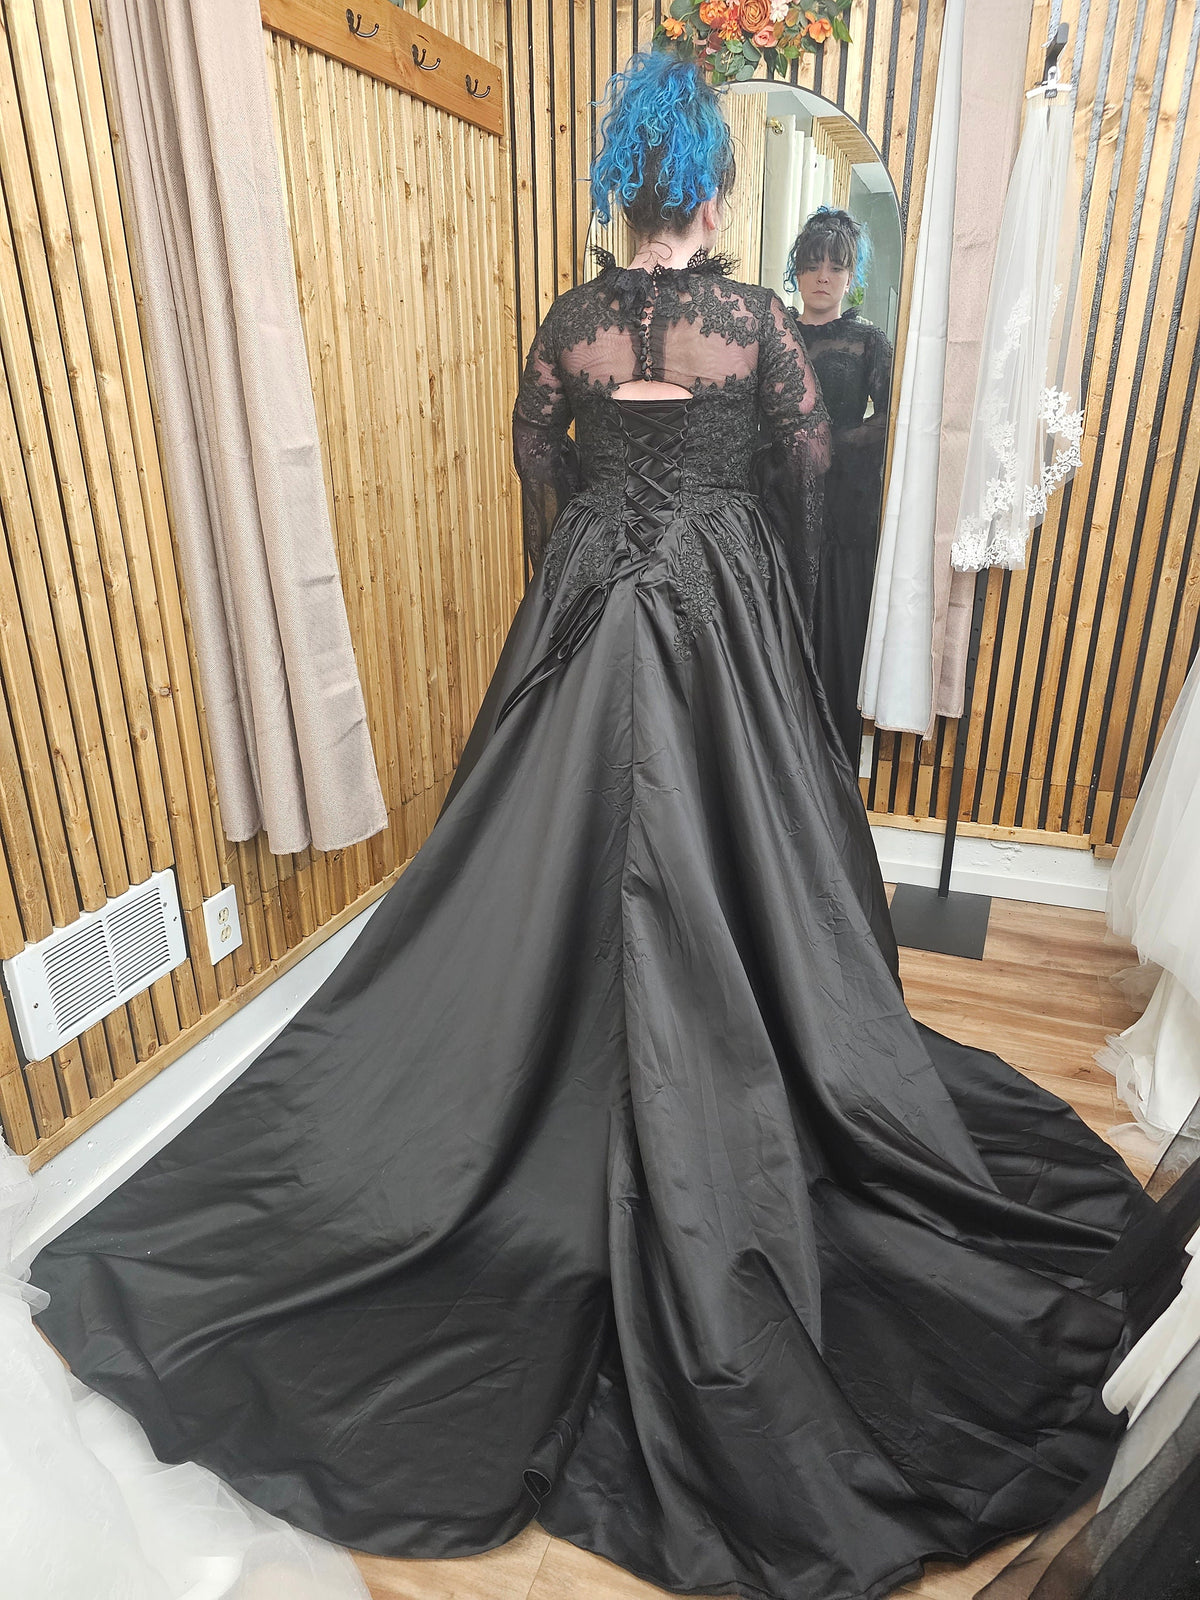 Untraditional Black Gothic Wedding Dress Bridal Long Bell Sleeves Lace with Train Beaded Bodice High Collar Neckline Illusion Back Corset